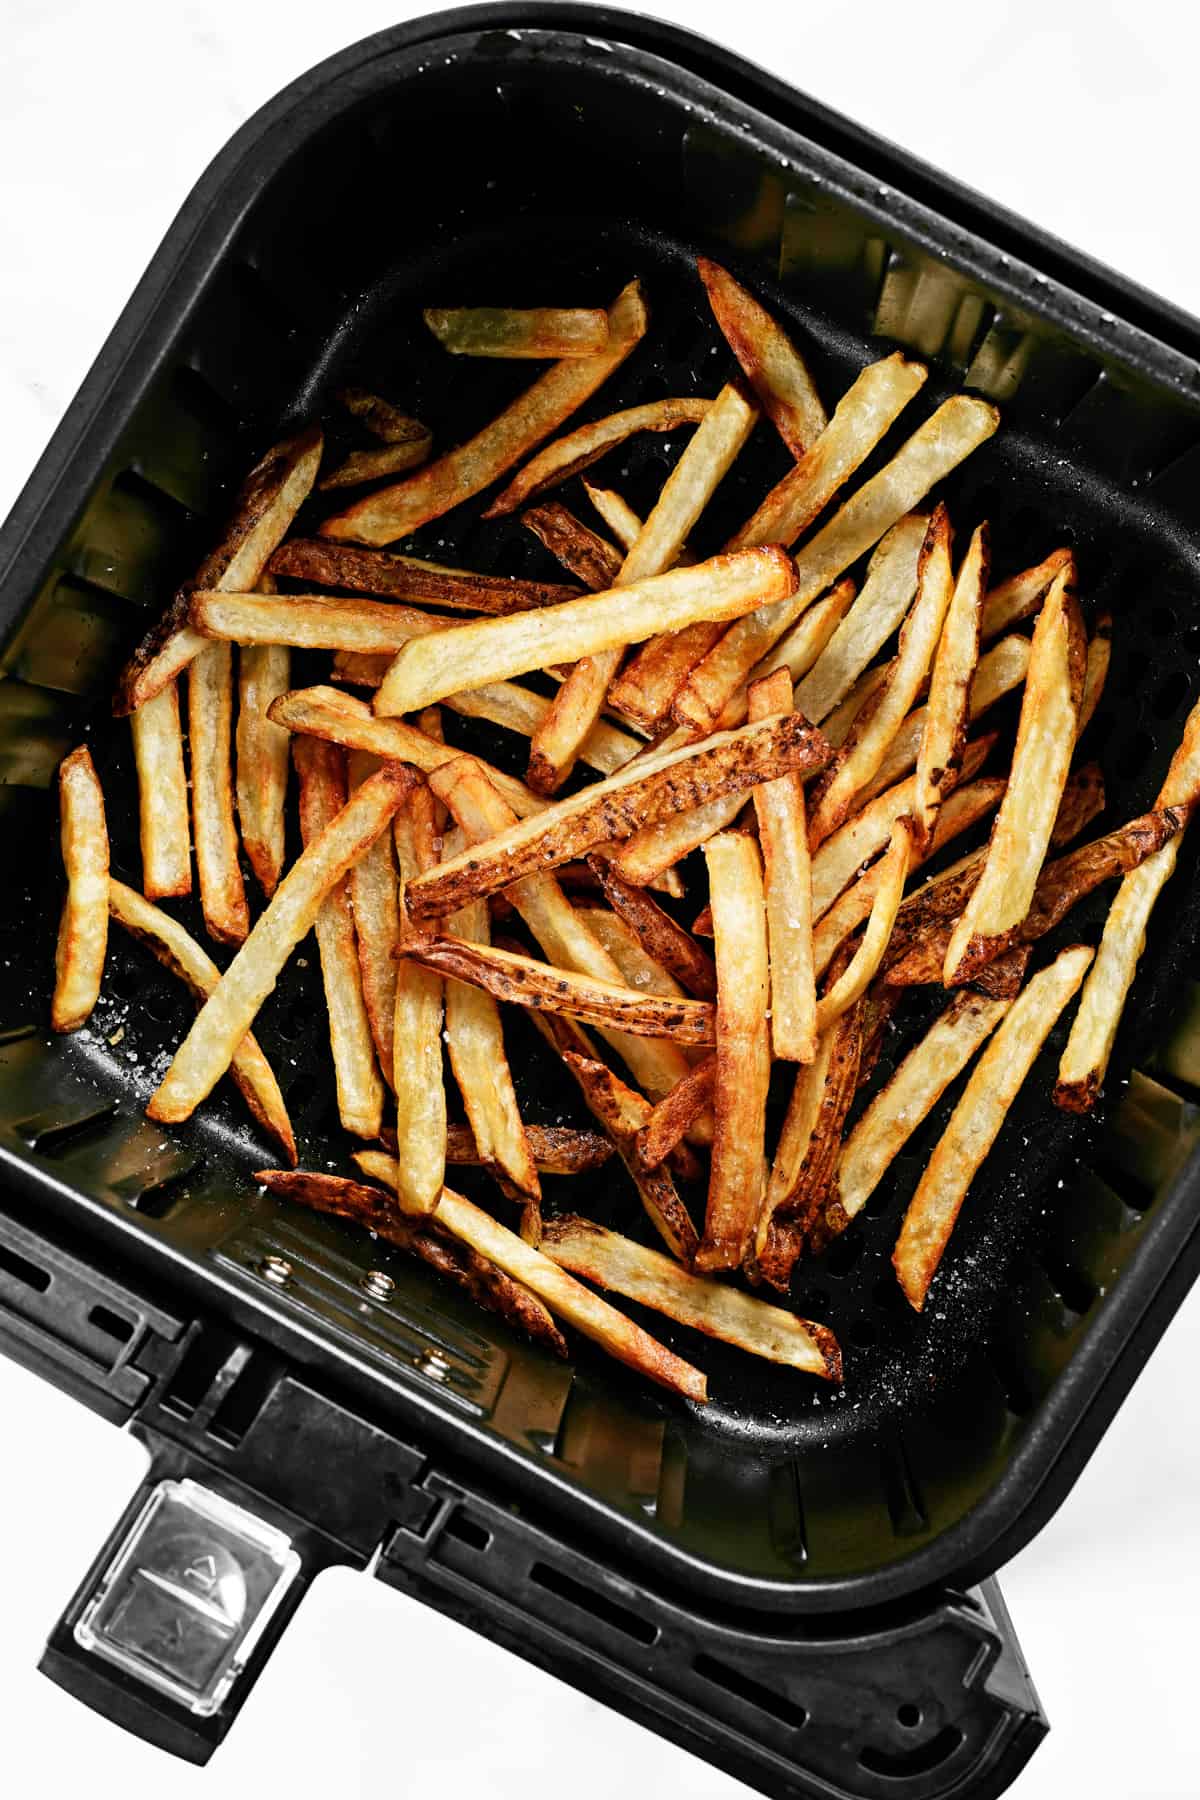 golden brown, crispy french fries in an air fryer basket.